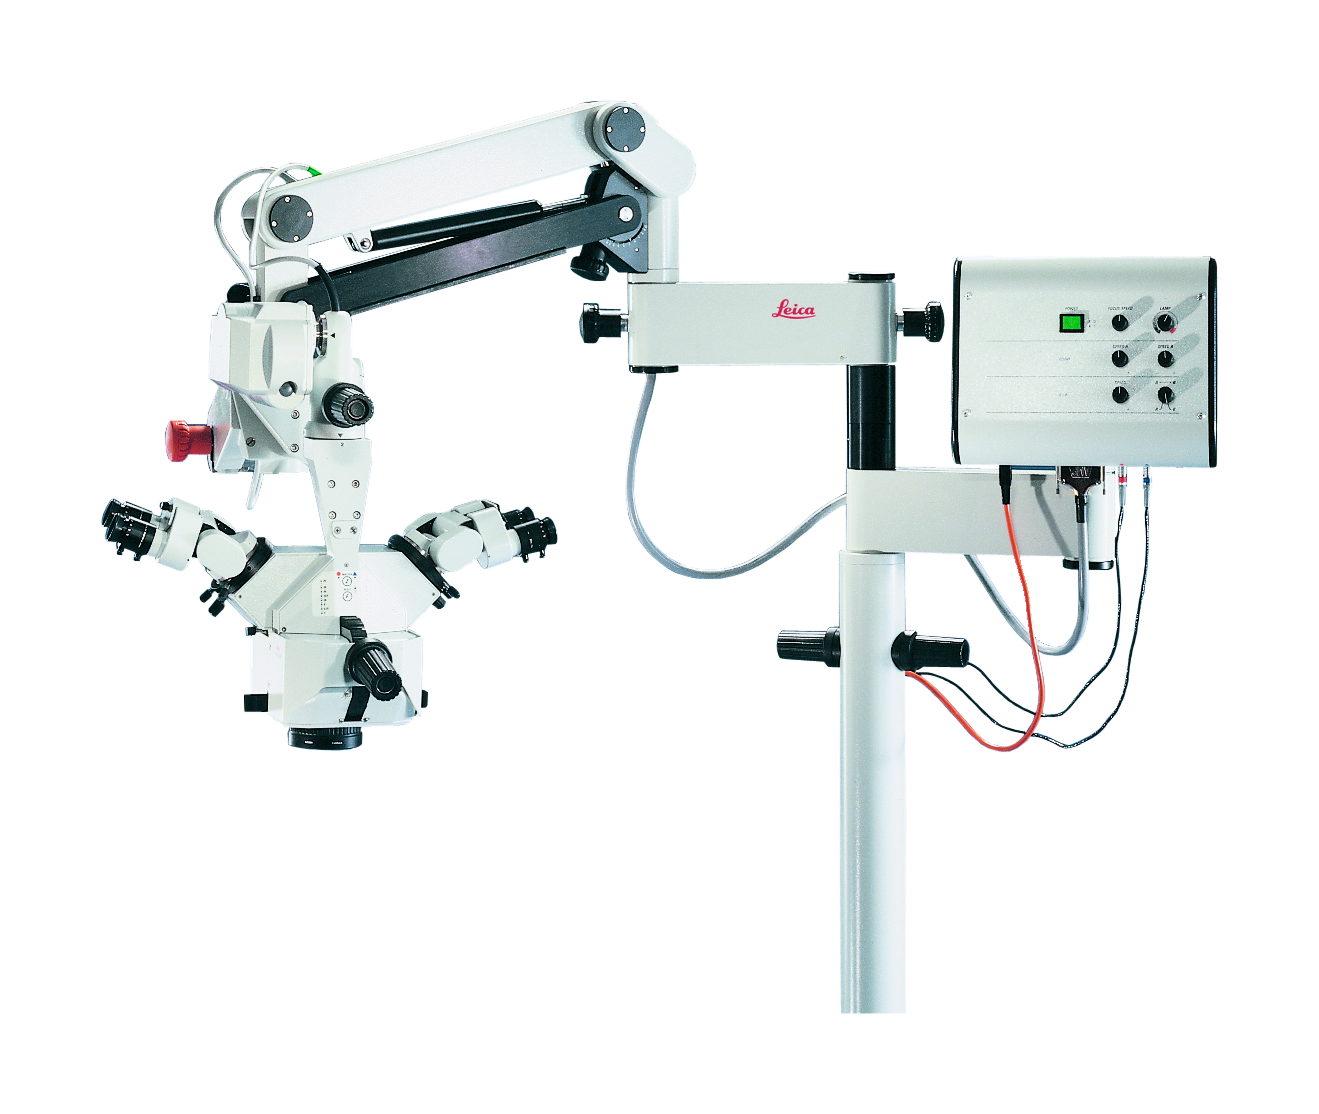 The Leica M680 Surgical microscope for reconstructive, hand, heart and spinal surgery, urology and gynaecology.